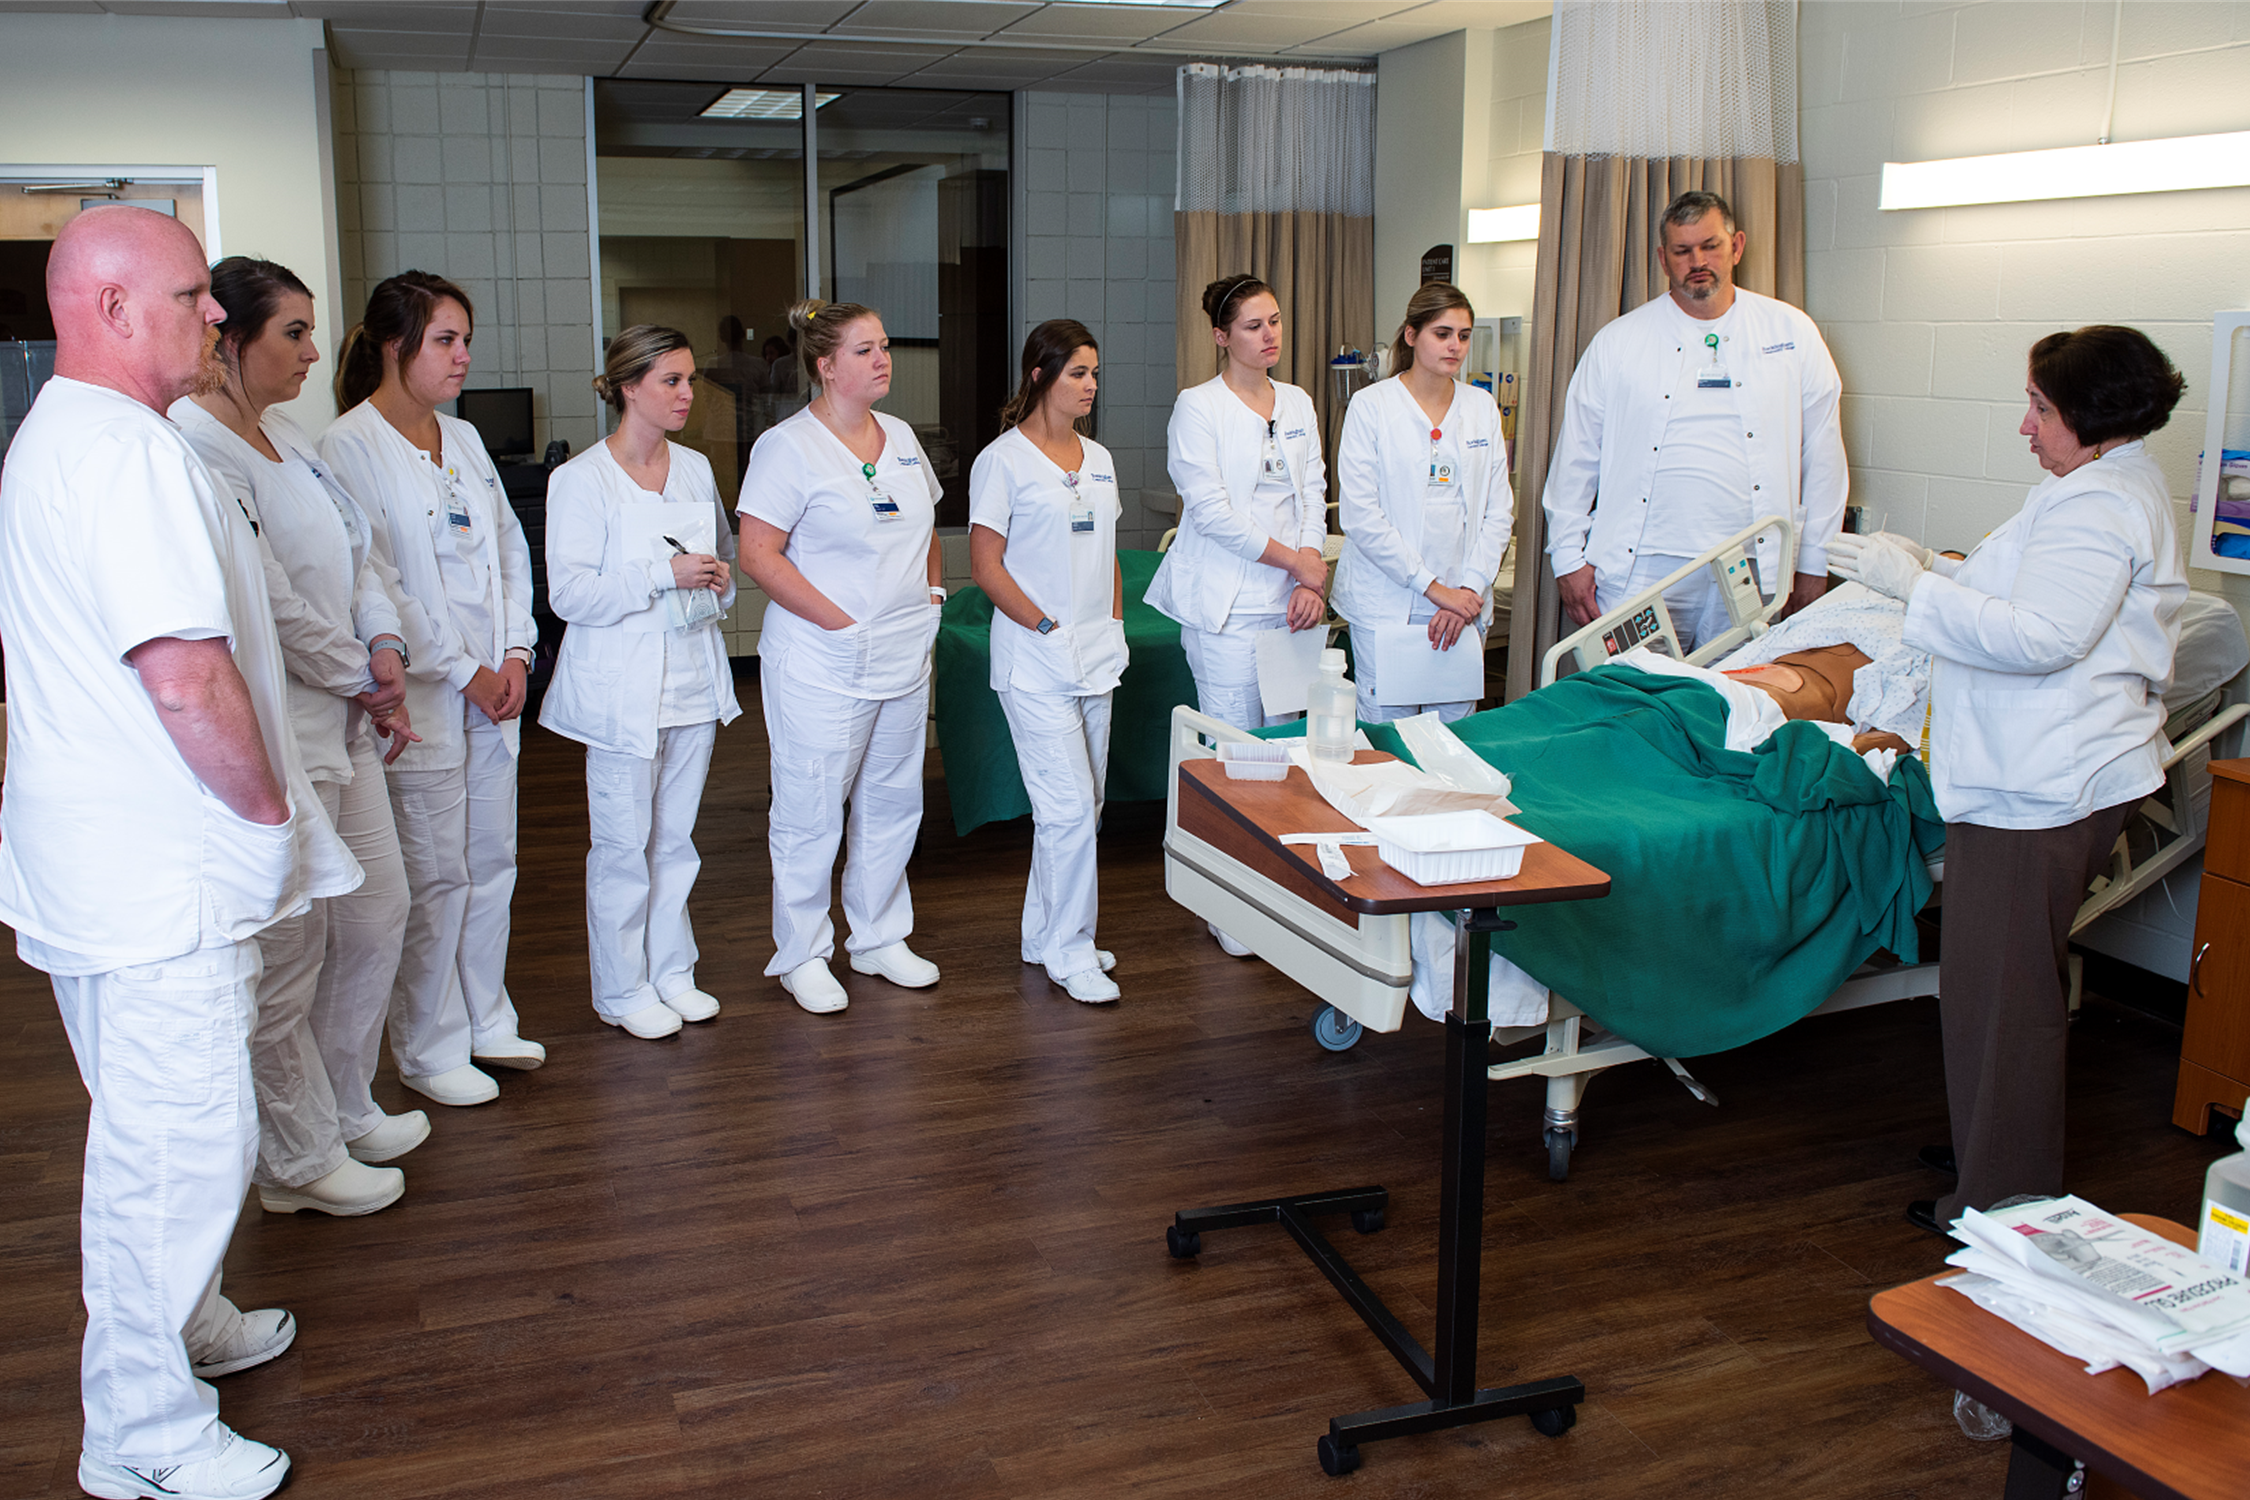 Group of medical students being taught by an instructor who is standing by a manikin.